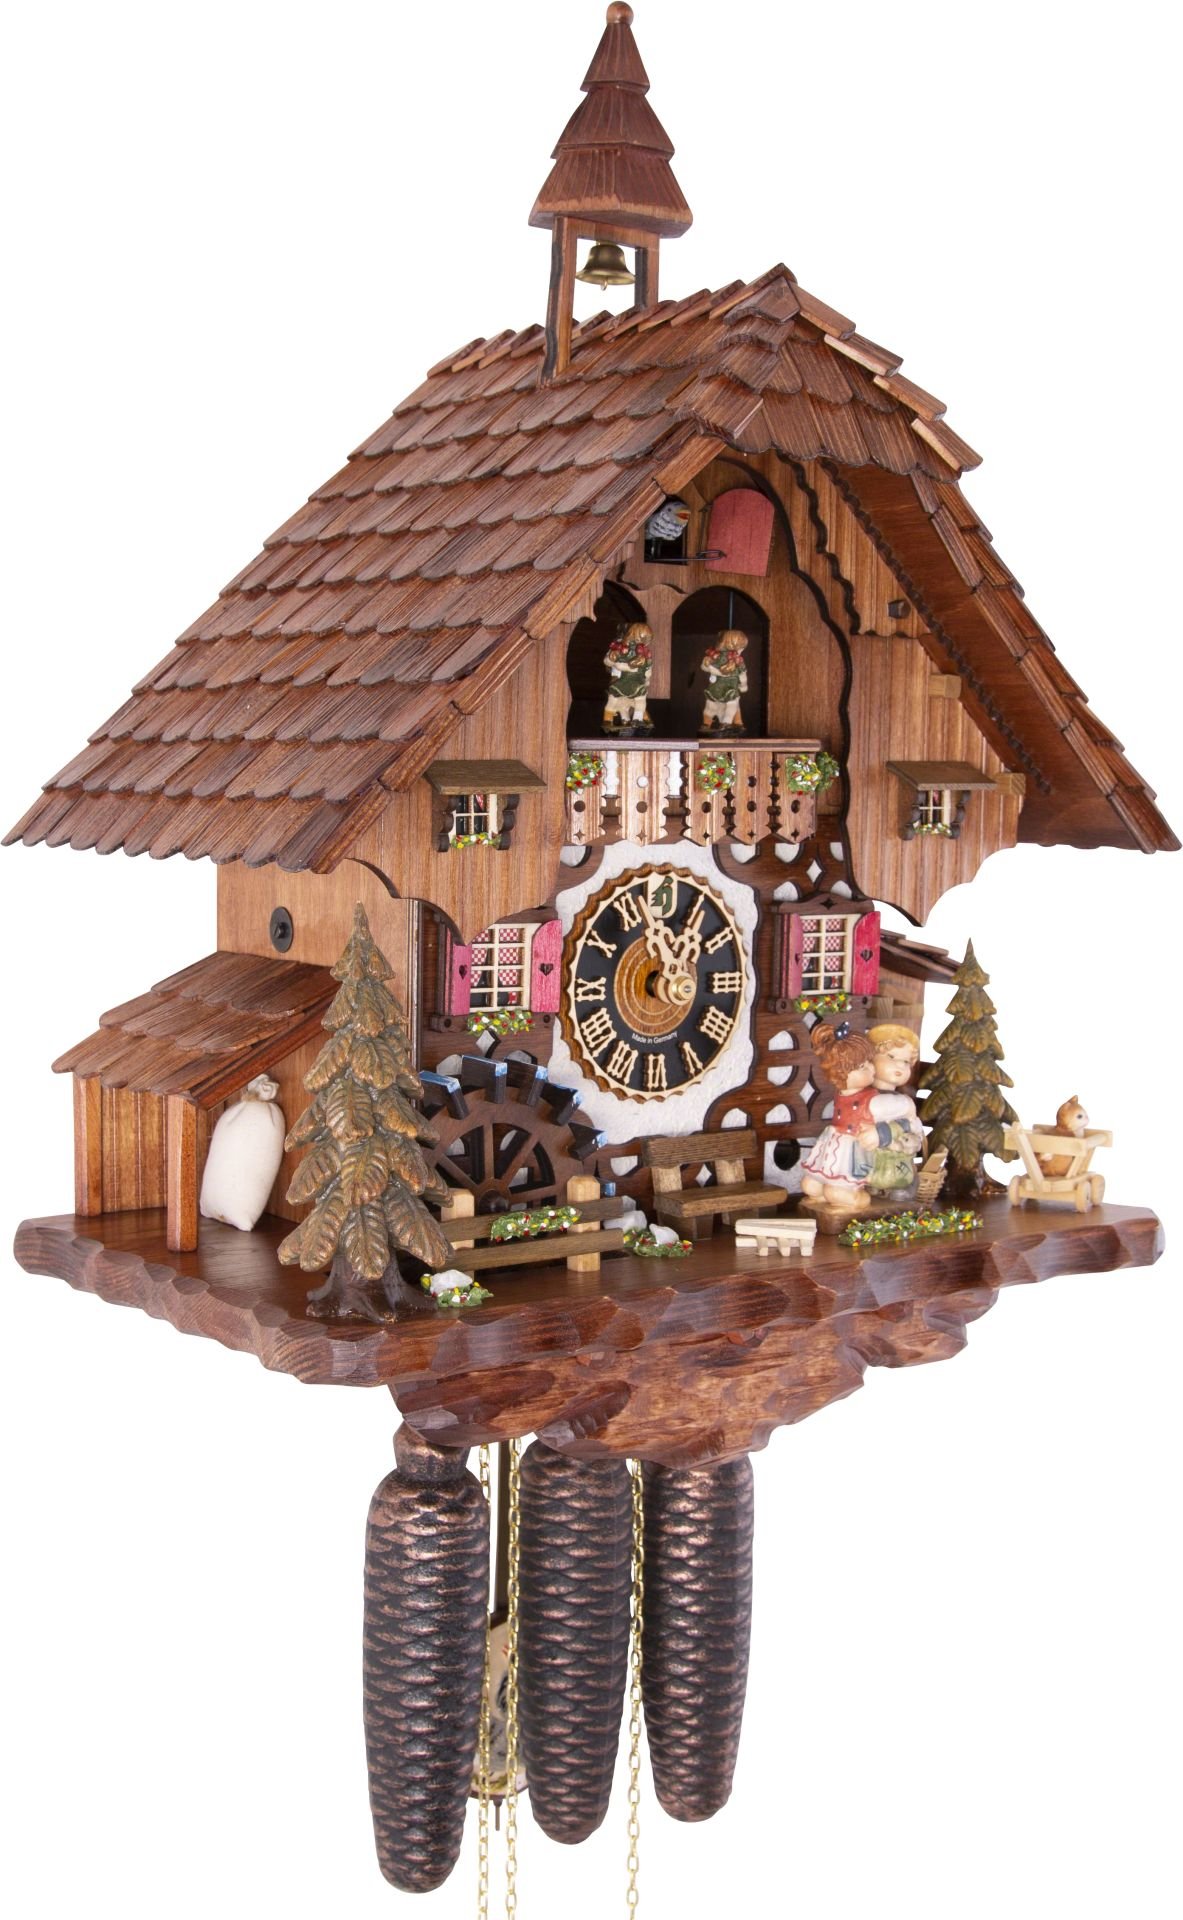 Cuckoo Clock Chalet Style 8 Day Movement 40cm by Hönes